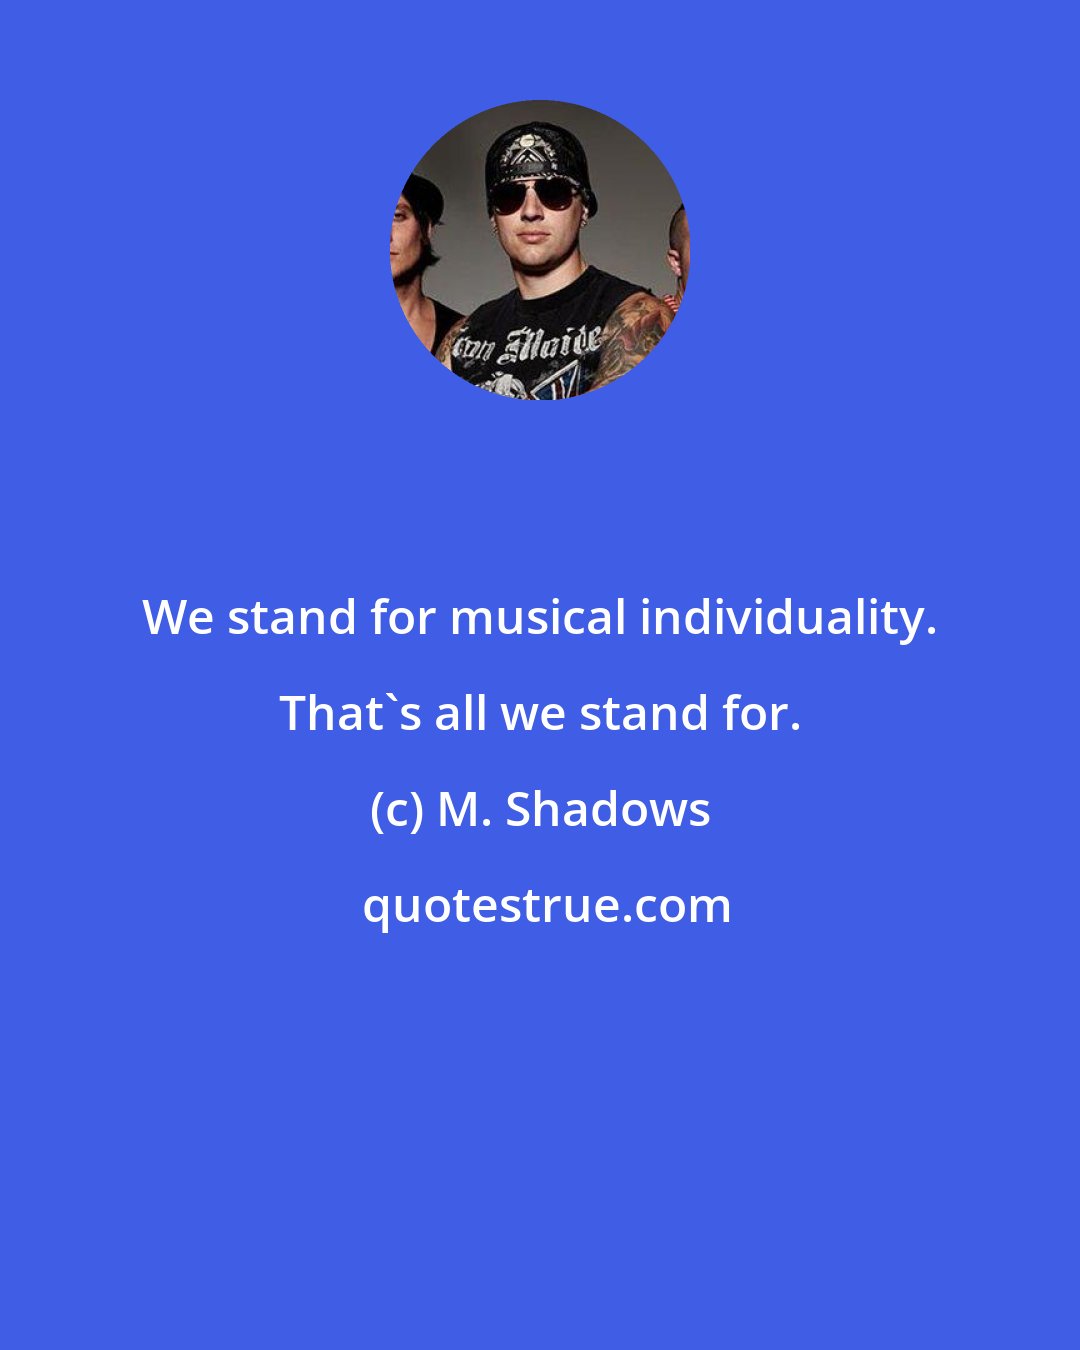 M. Shadows: We stand for musical individuality. That's all we stand for.